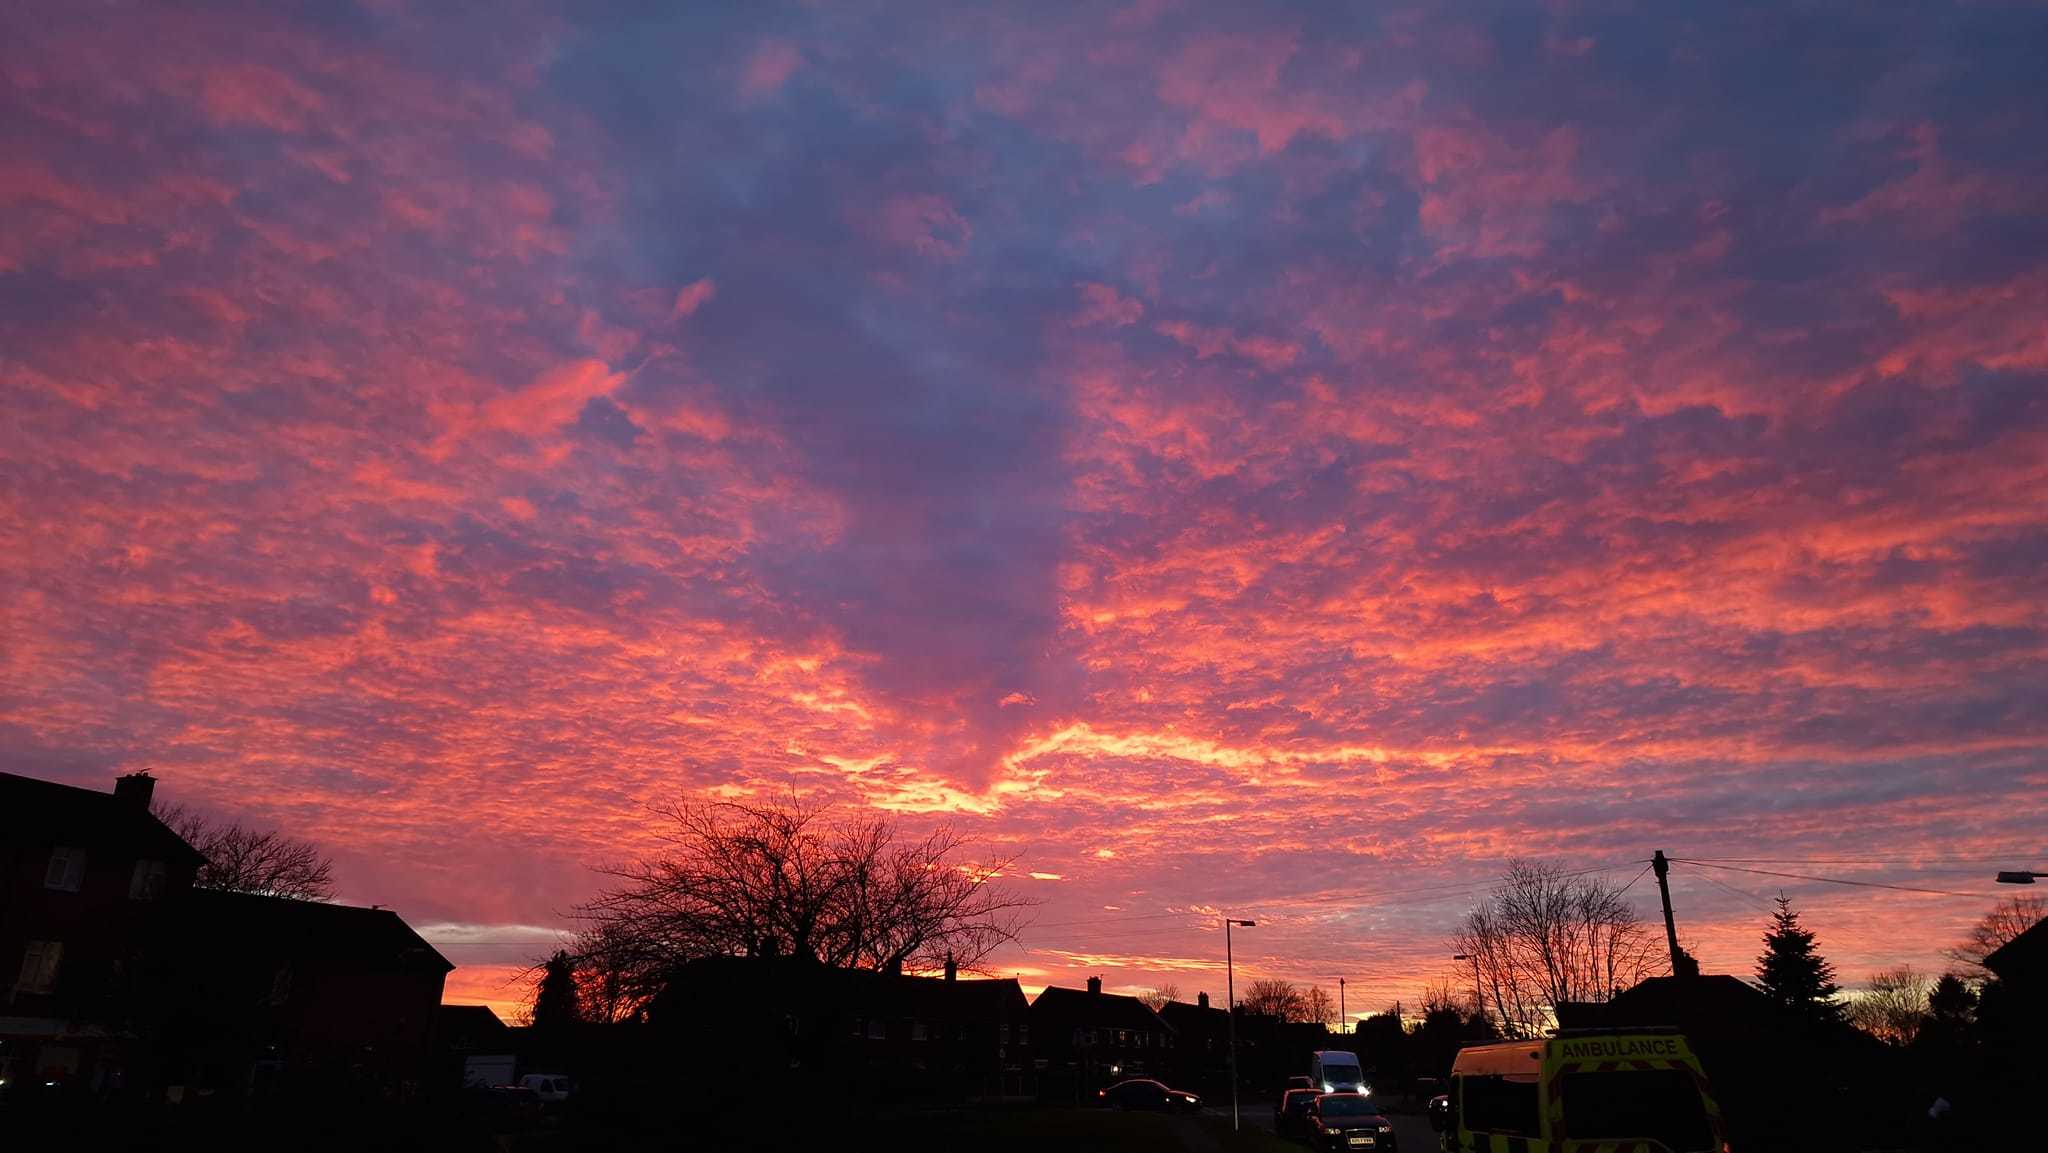 Sunset over Weaverham by Cathie Leather